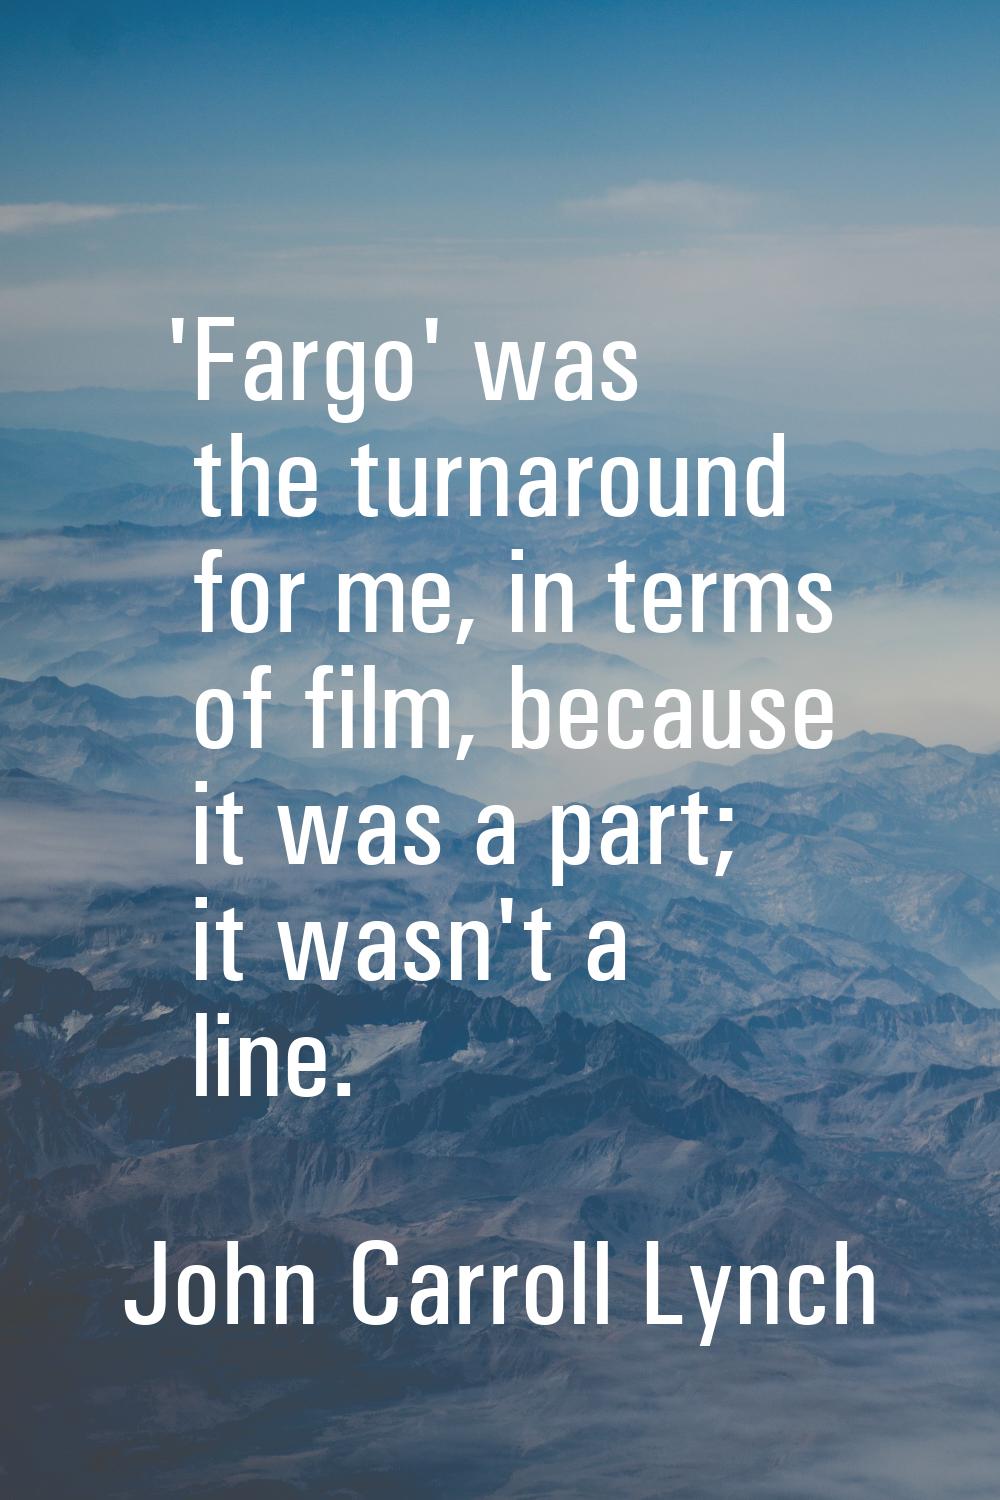 'Fargo' was the turnaround for me, in terms of film, because it was a part; it wasn't a line.